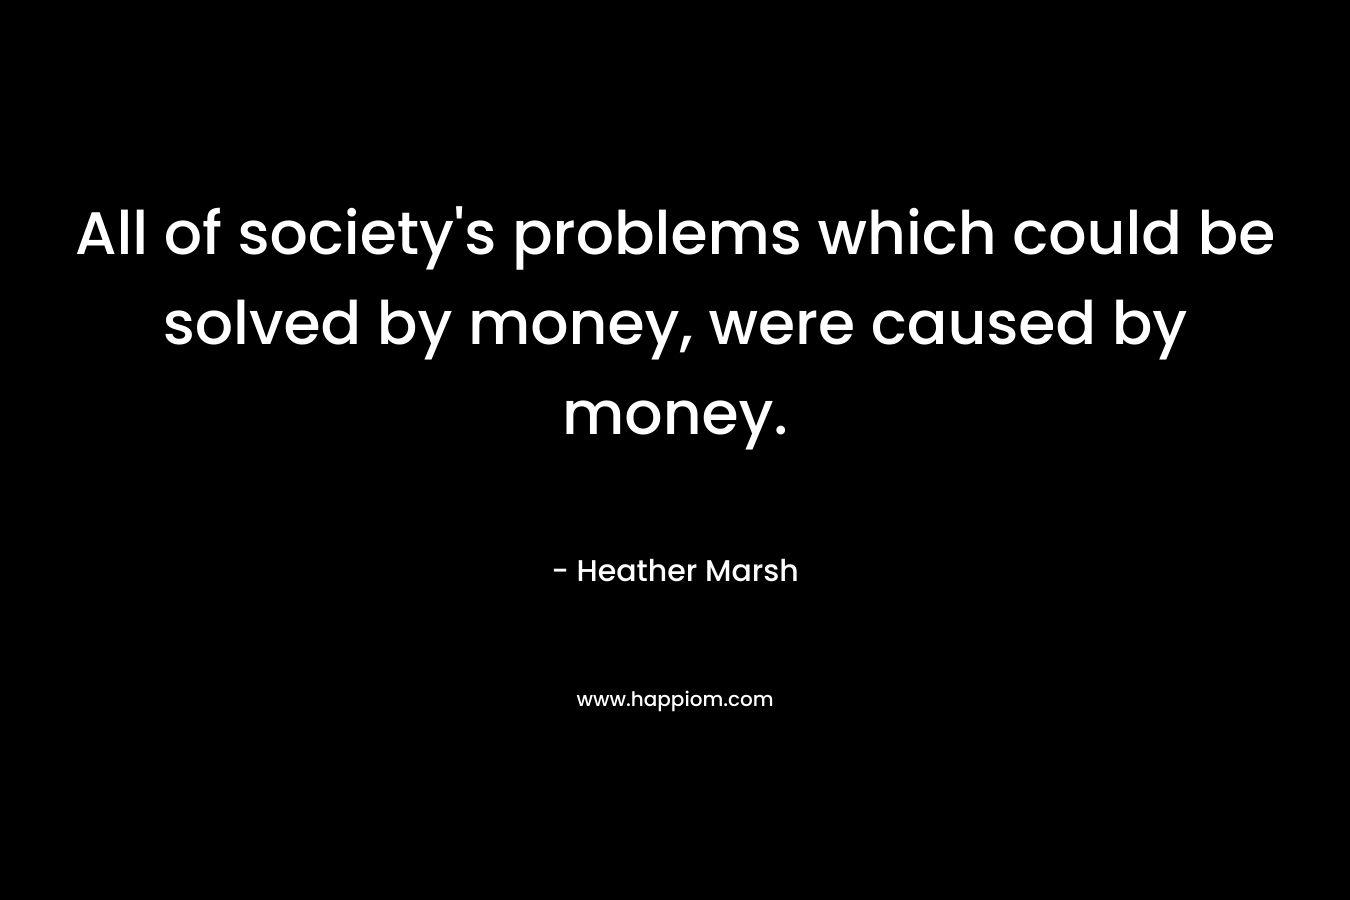 All of society's problems which could be solved by money, were caused by money.